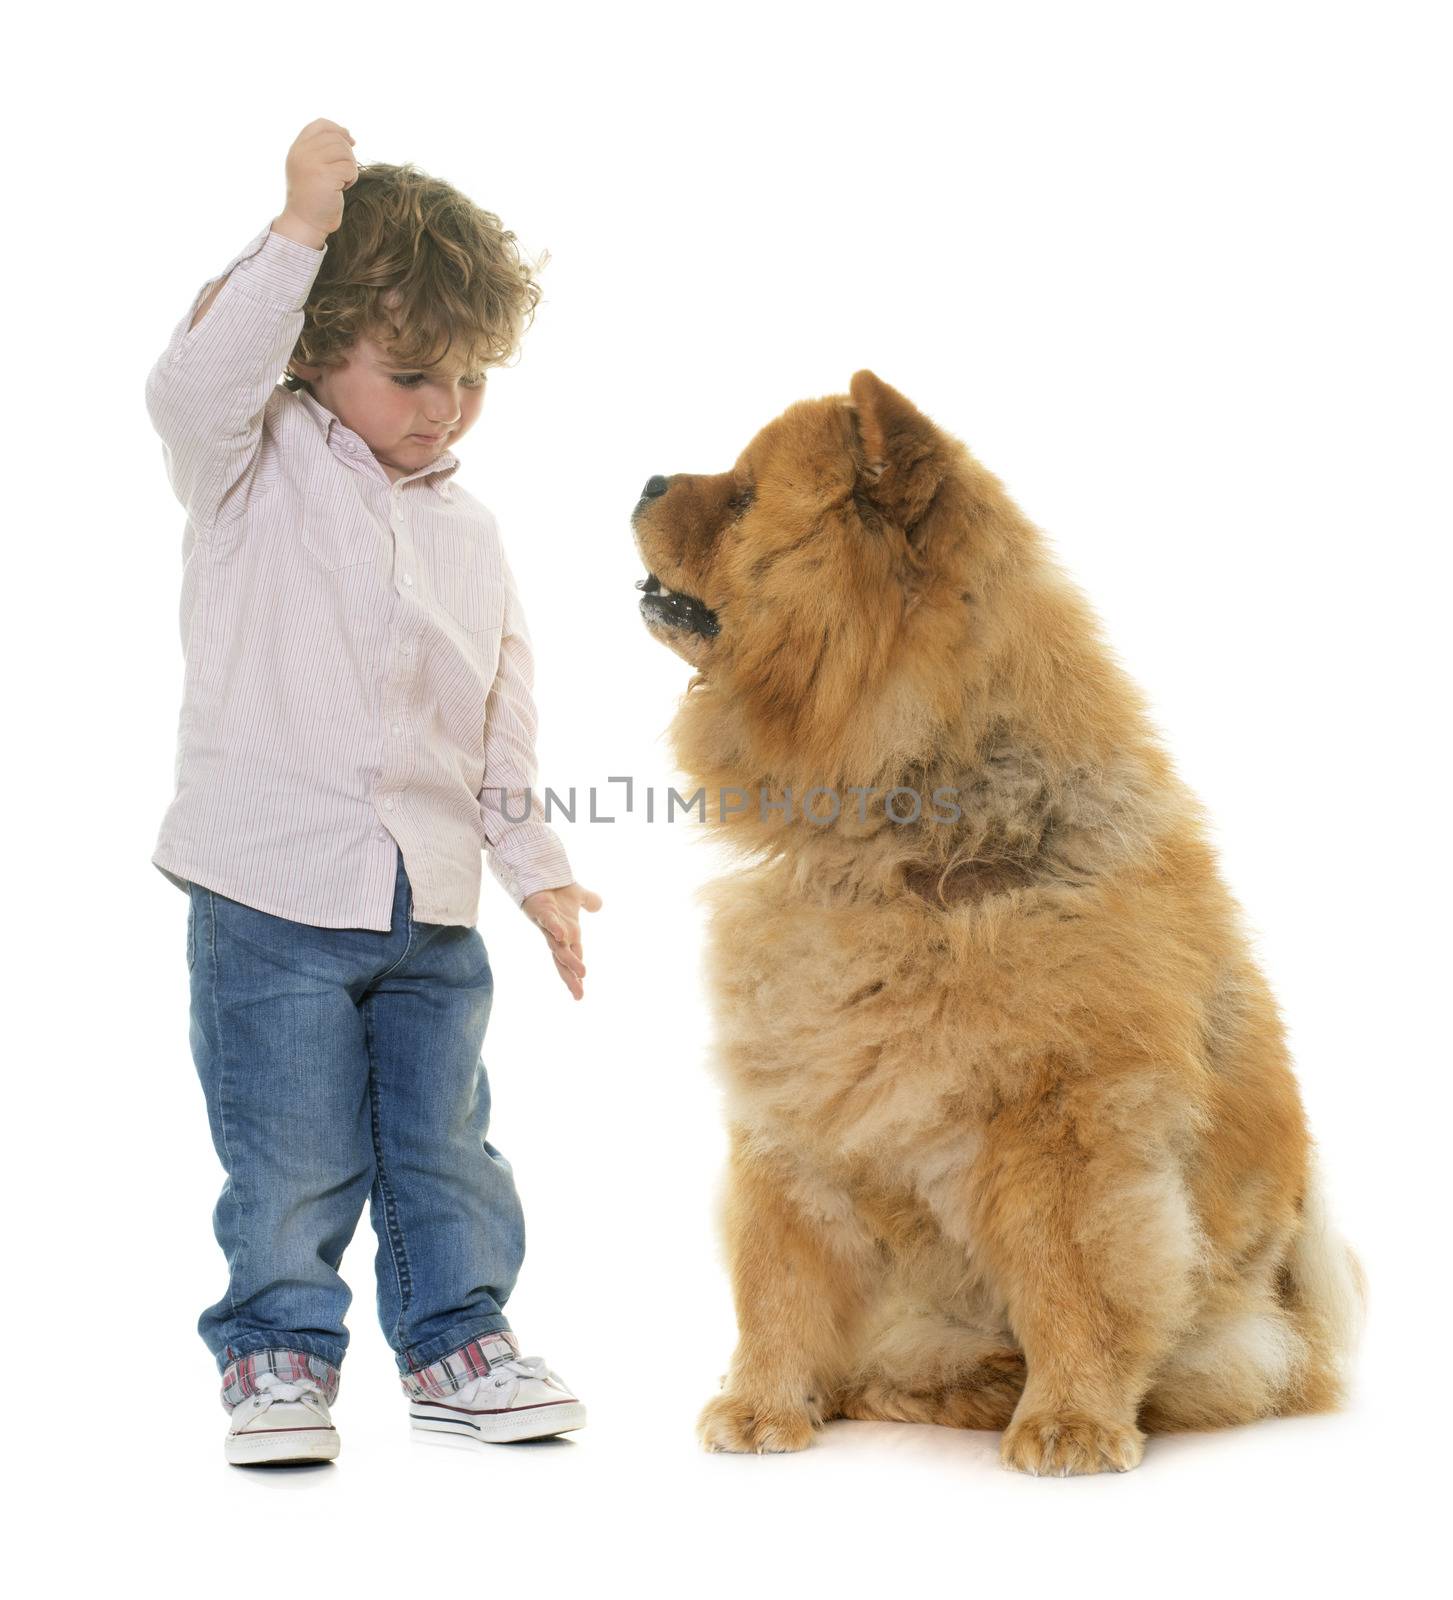 chow chow and boy in front of white background